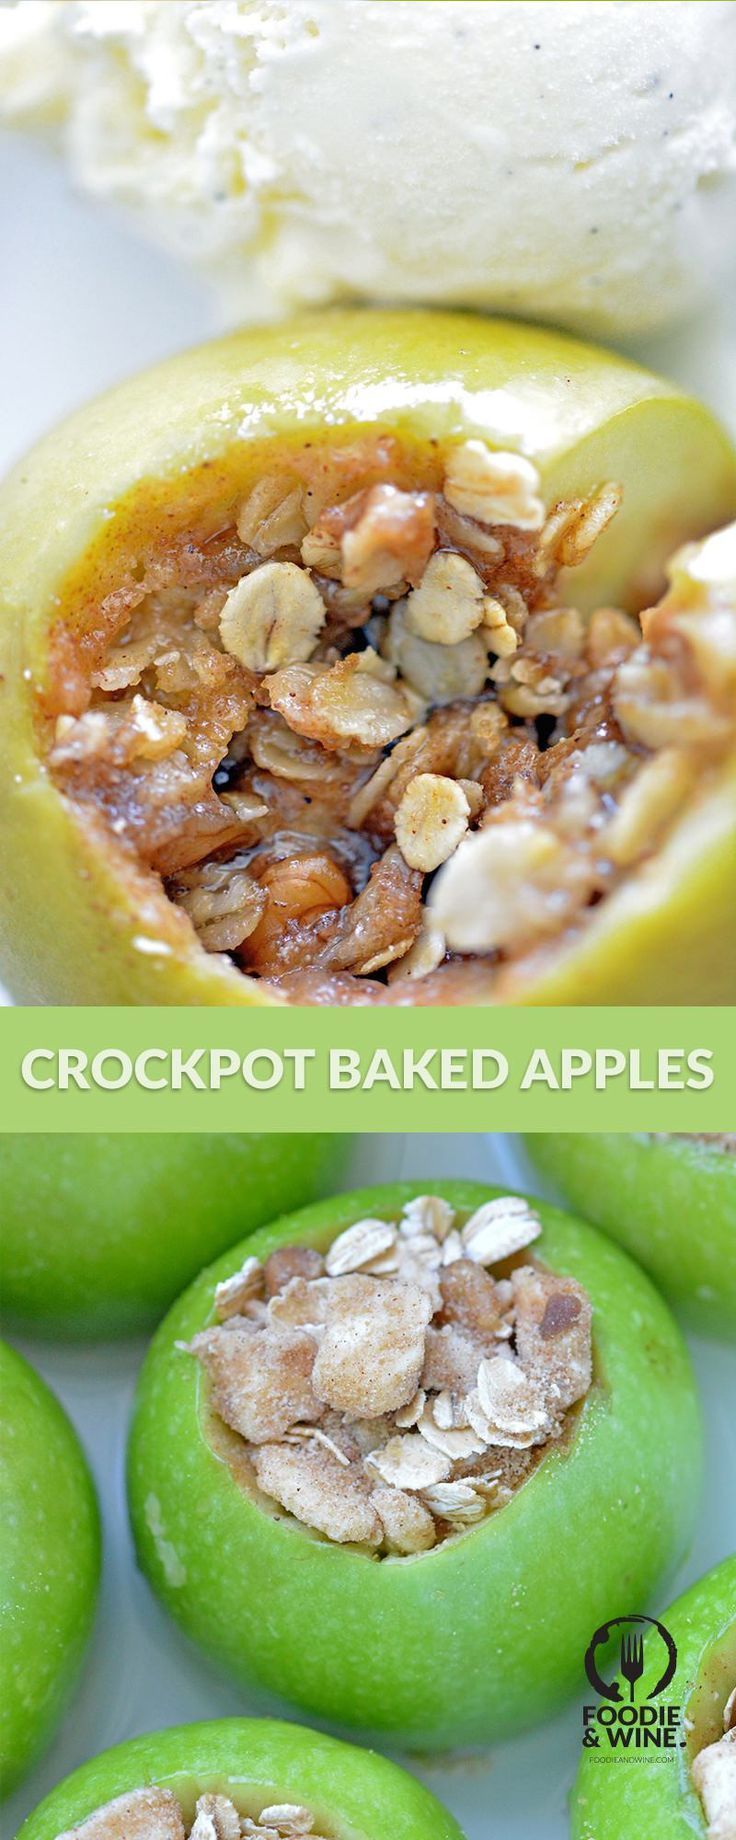 Crockpot Baked Apples *4 hours on low was too long. The apples were like applesauce. If I had taken them out at 2ish hours, they probably would have been perfect. Delicious and light though! -   24 diabetic apple recipes
 ideas